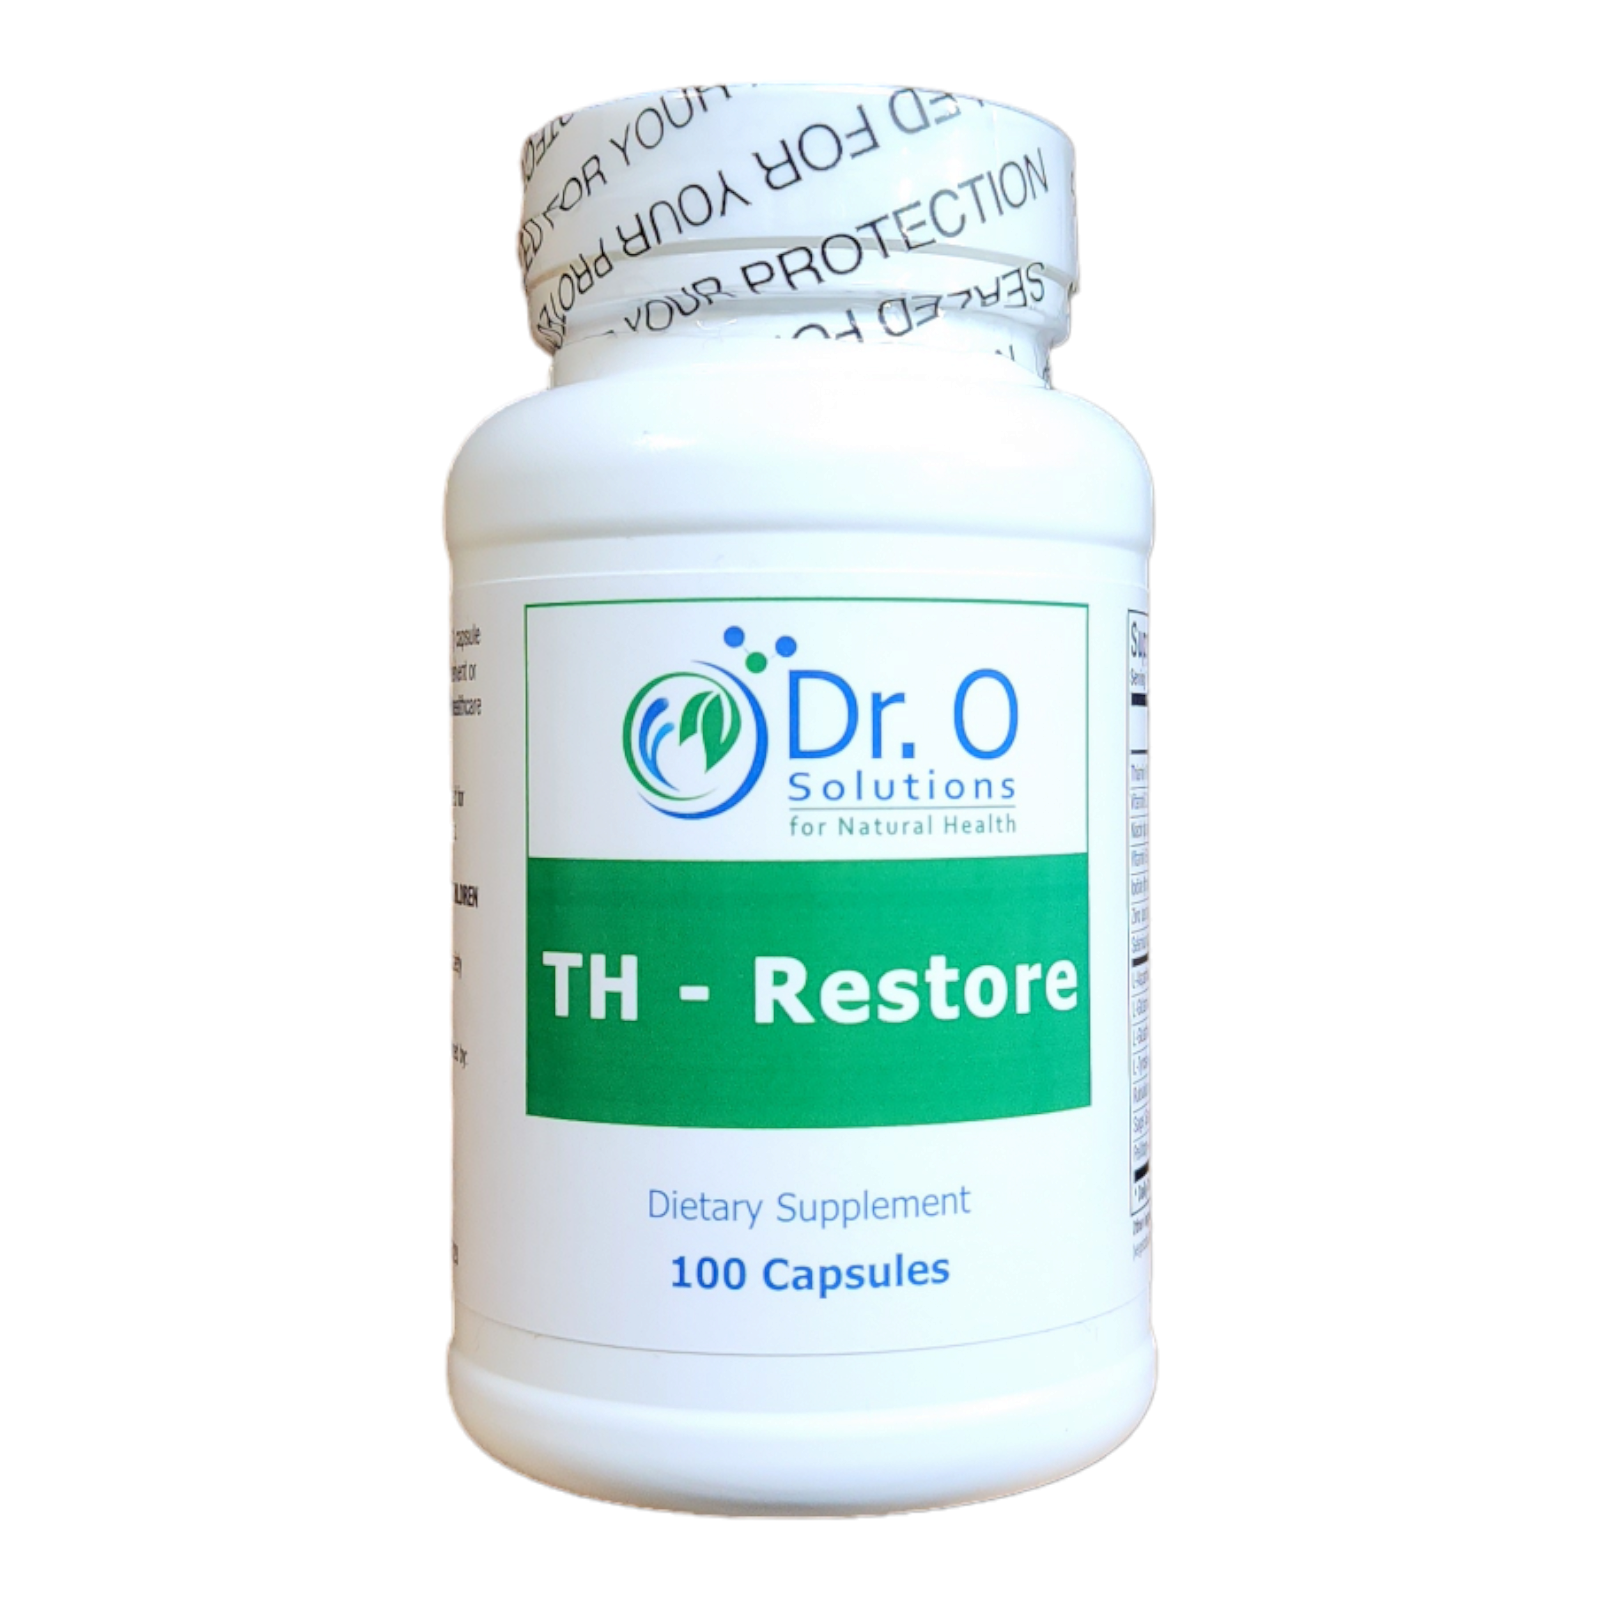 TH - Restore is a Dietary Supplement which gives Thyroid Gland support, metabolic health, and health Thyroxine levels.